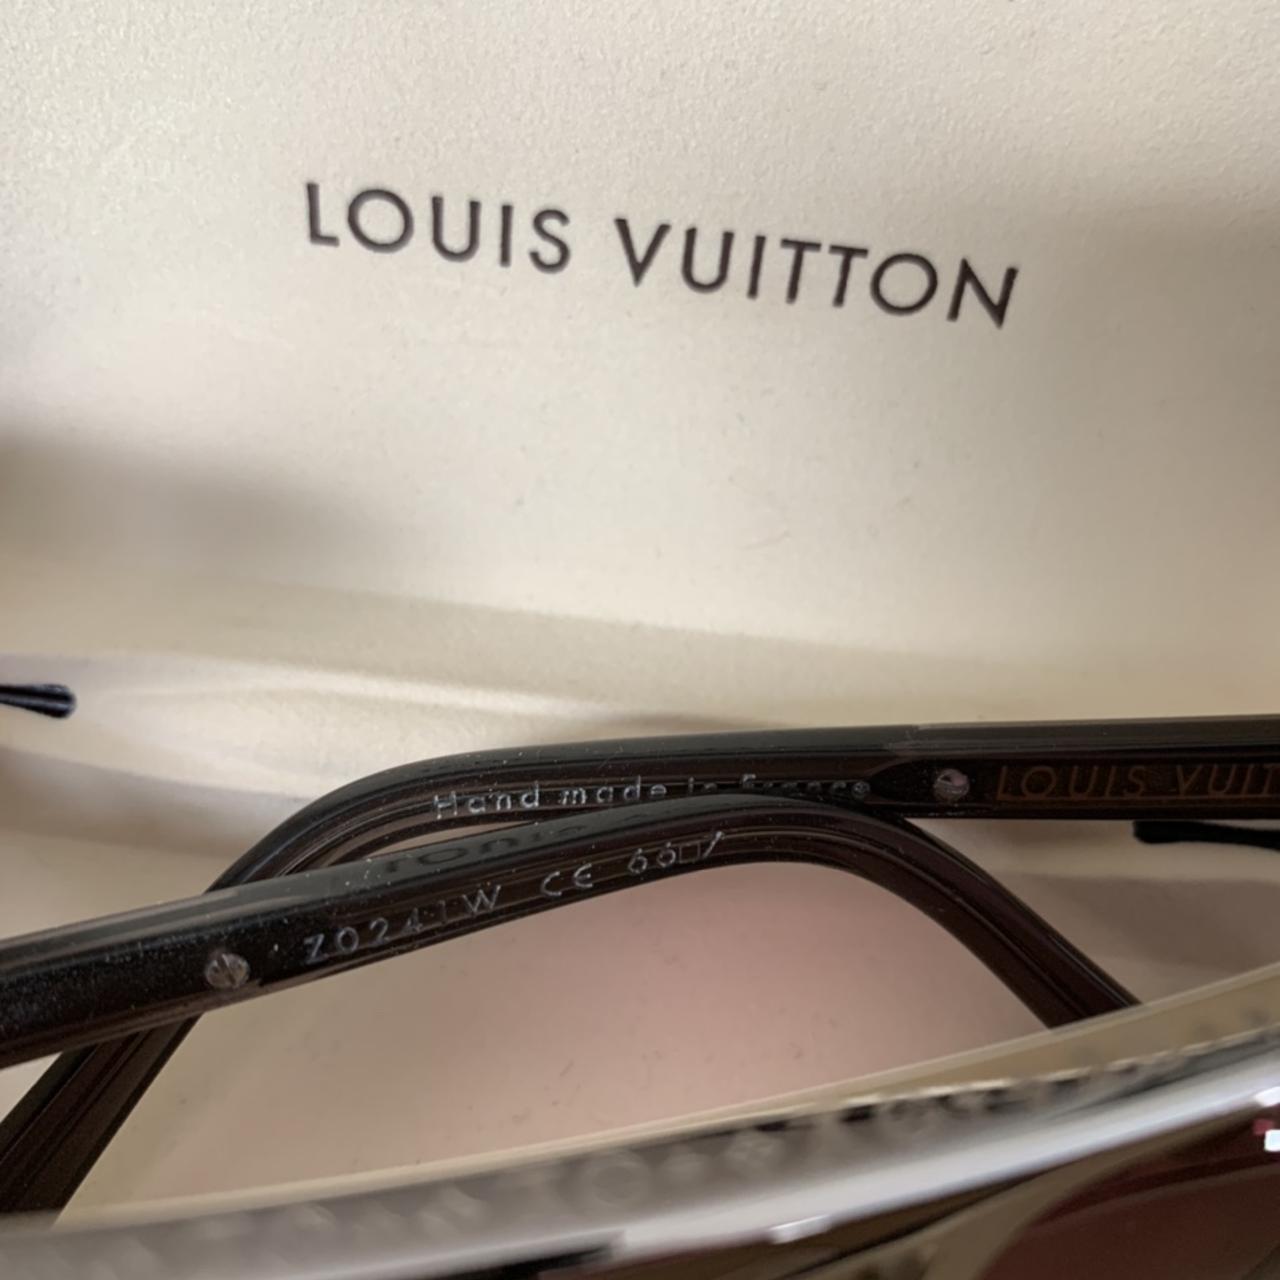 I LOVE the Silver & Grey Evidence sunglasses from Louis Vuittonbut not  for $720.